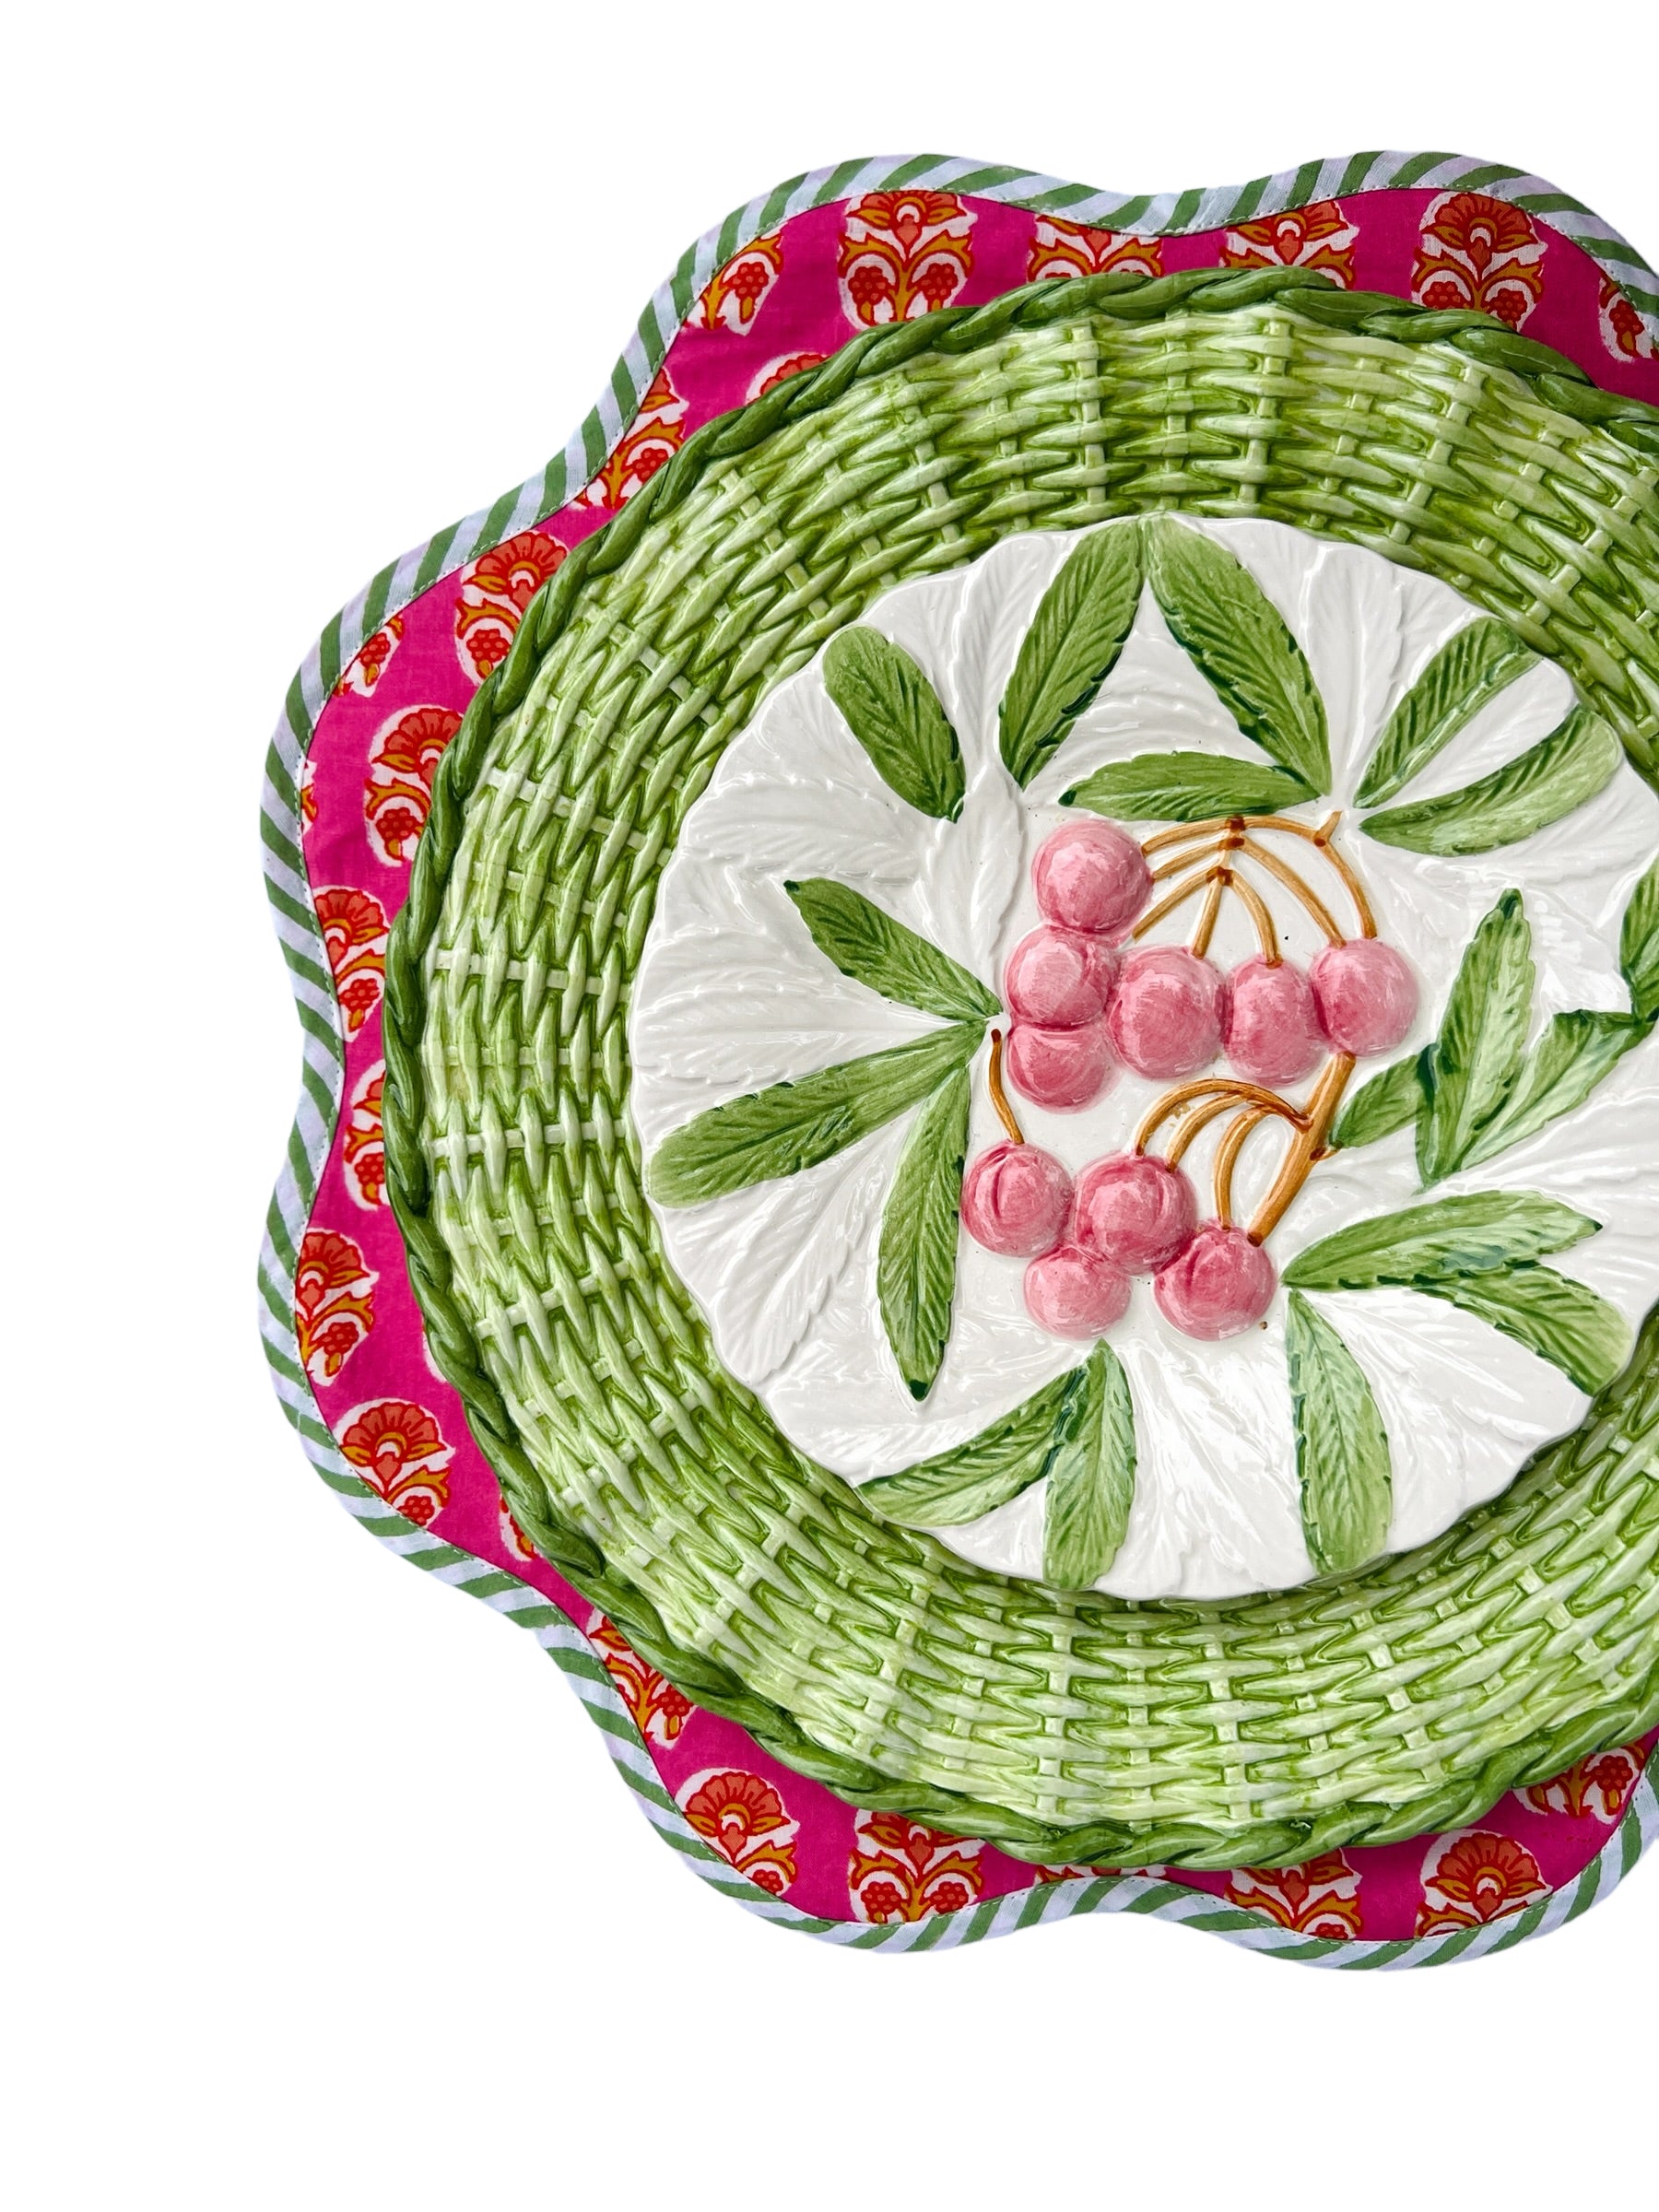 Scalloped bright pink block print placemat set with green and white piping